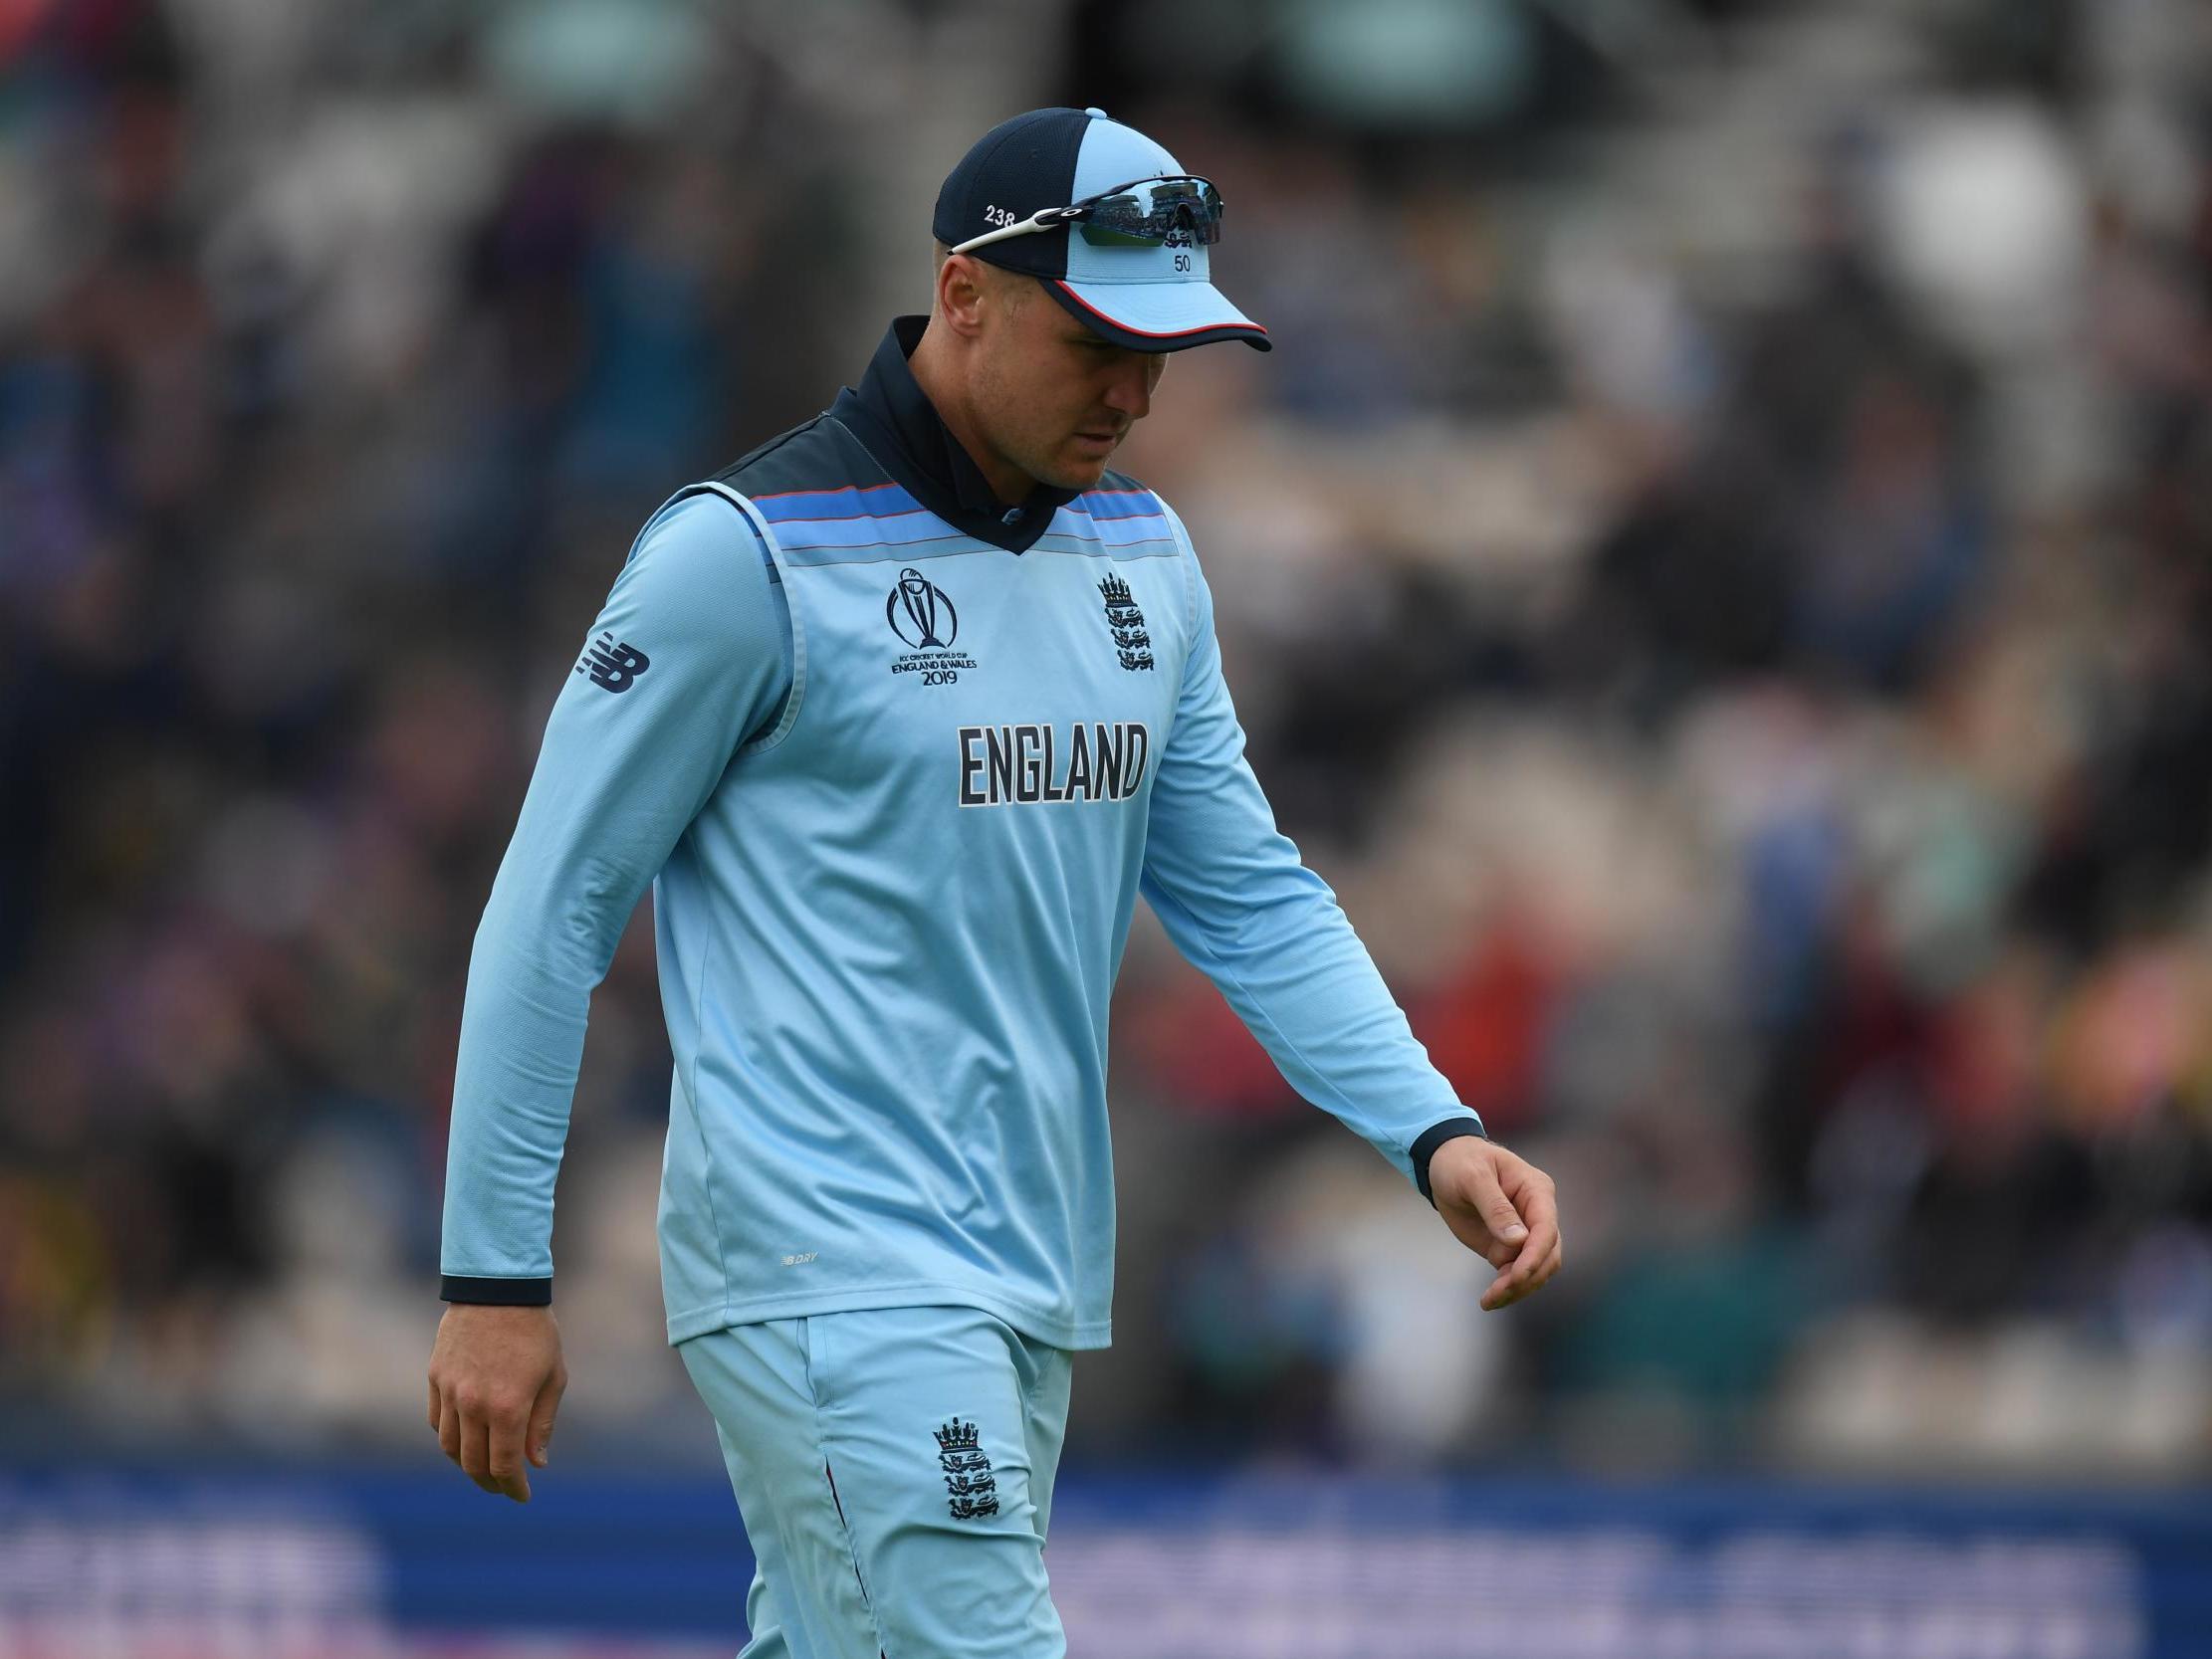 Jason Roy will not be used unless he is fully fit